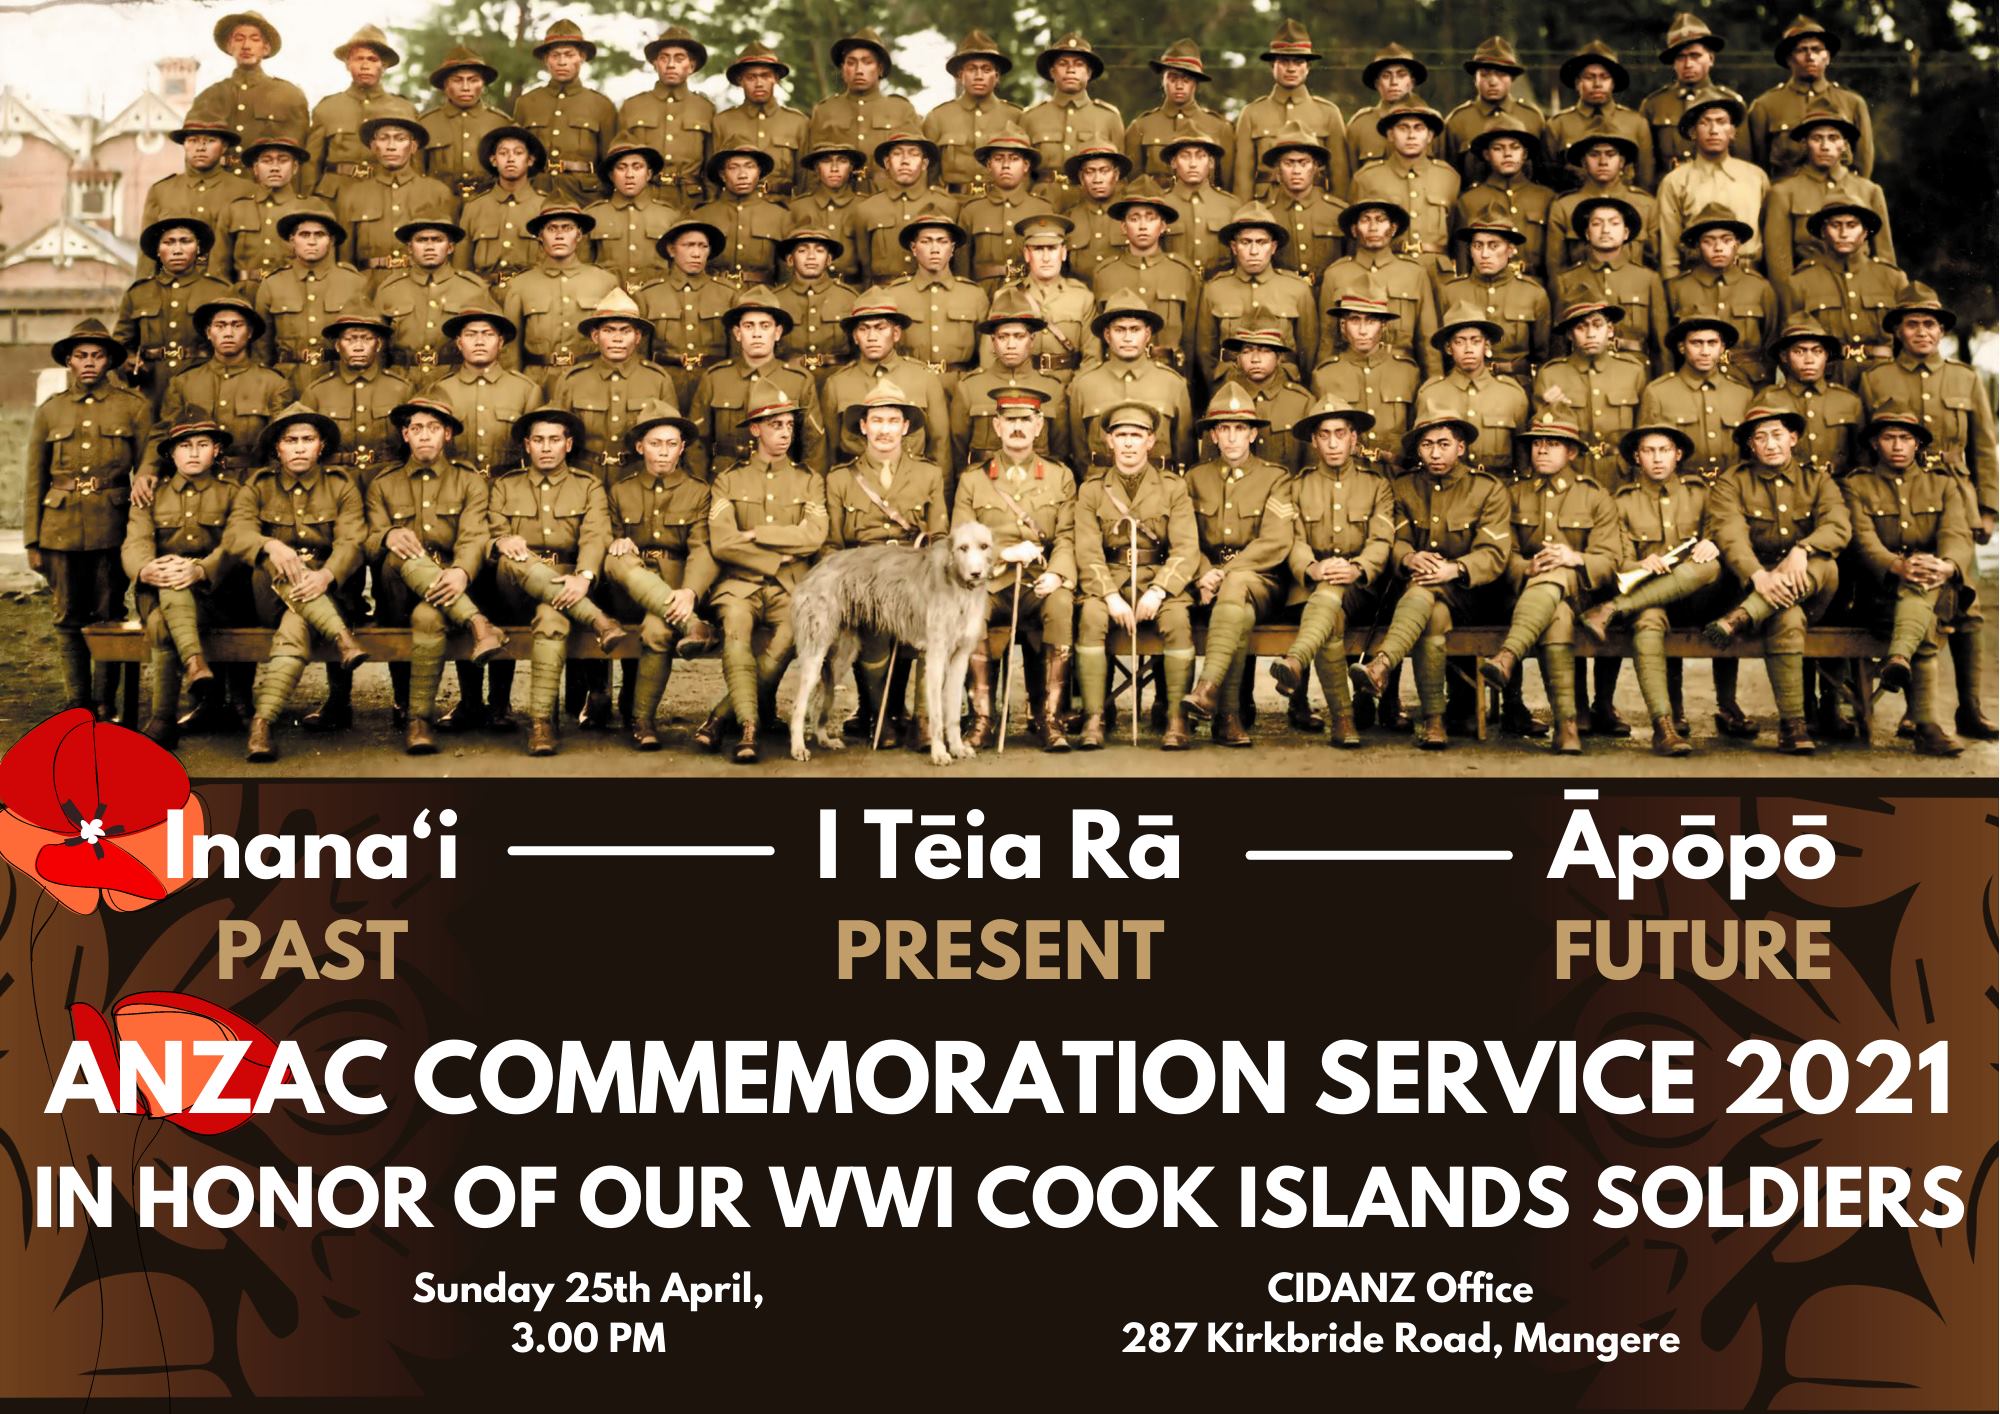 Cook Islands soldiers will be commemorated by the Cook Islands ANZAC Committee